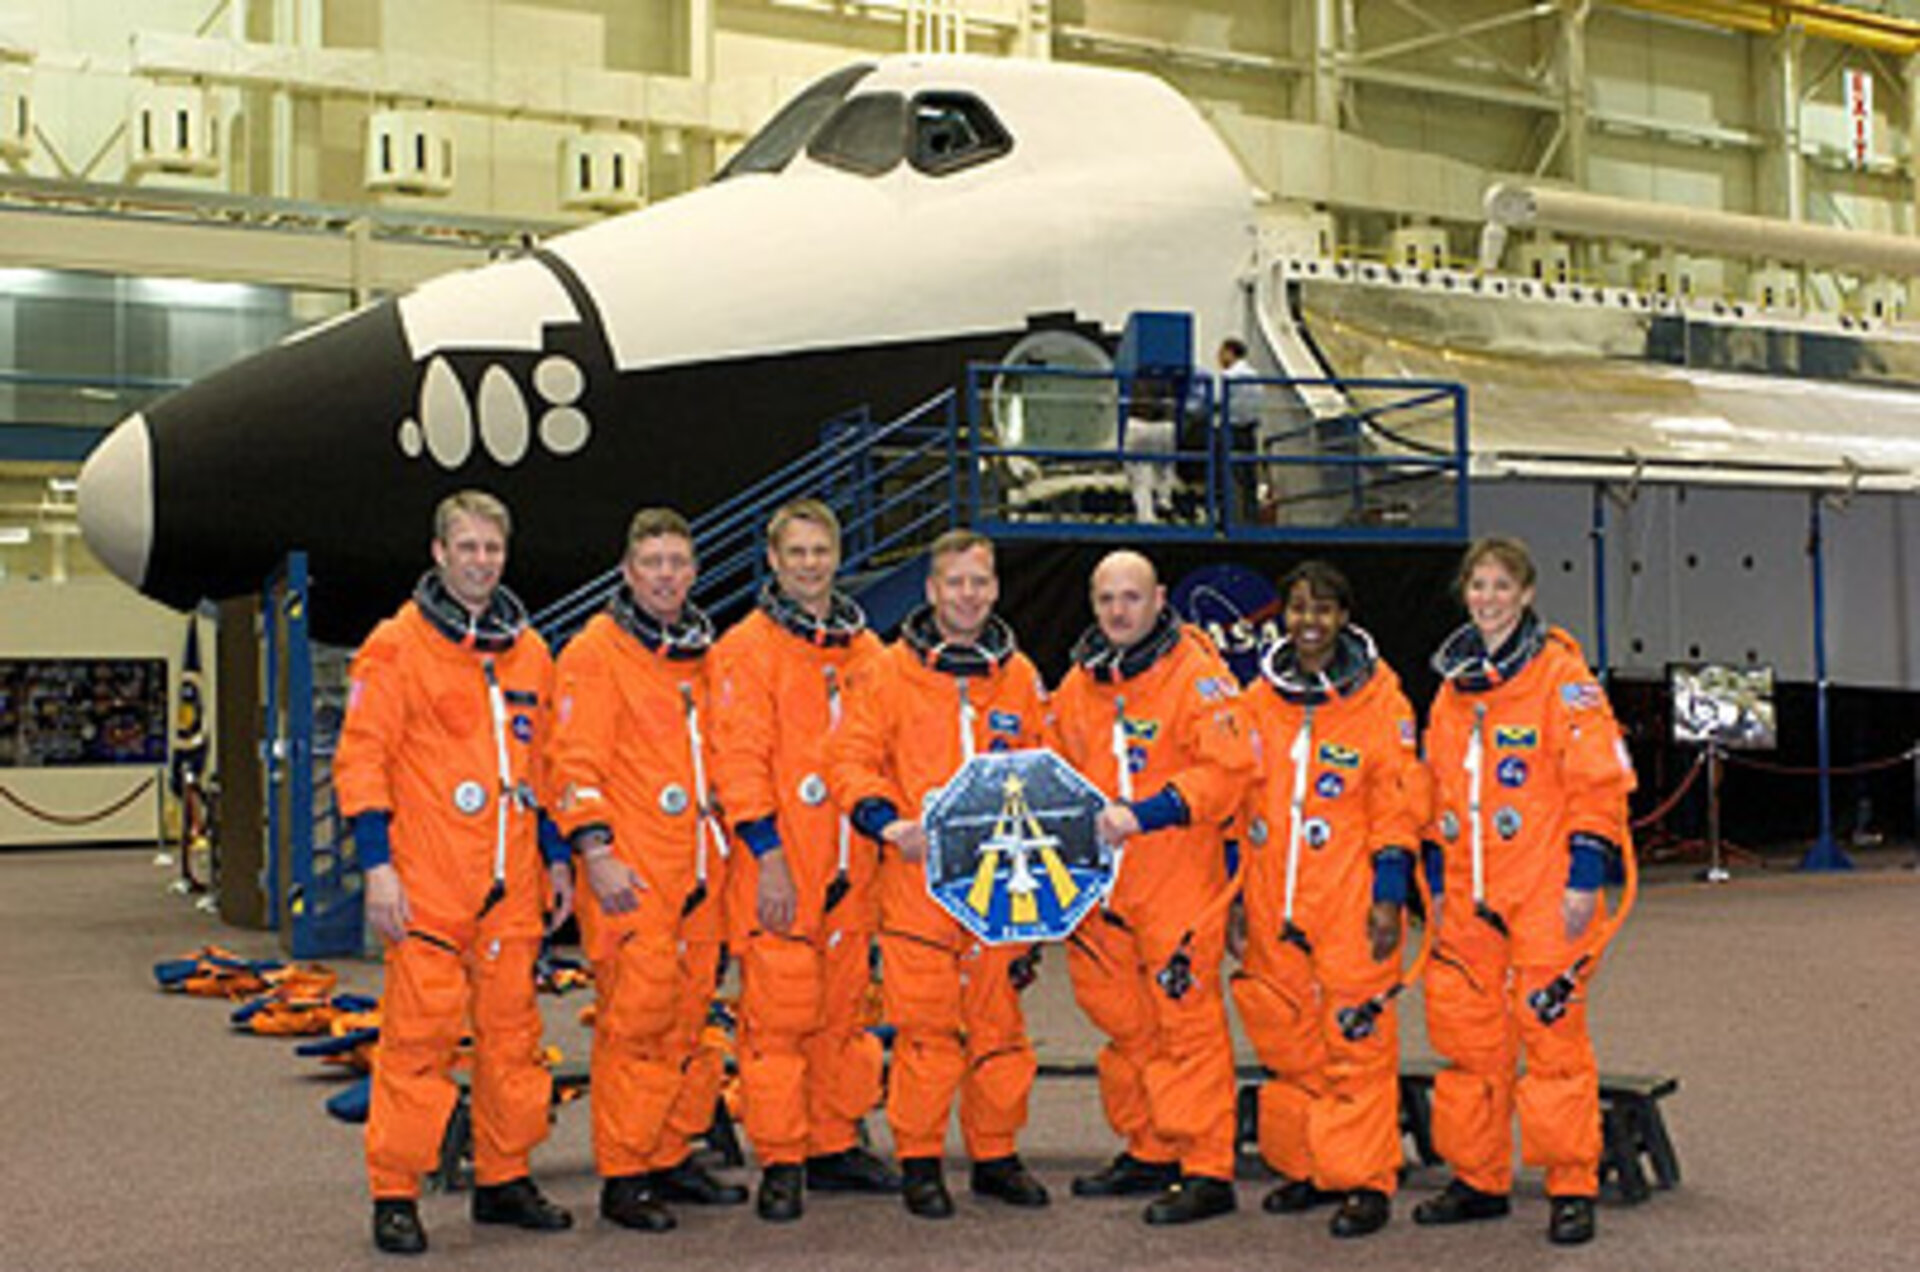 Crewmembers assigned to STS-121 mission